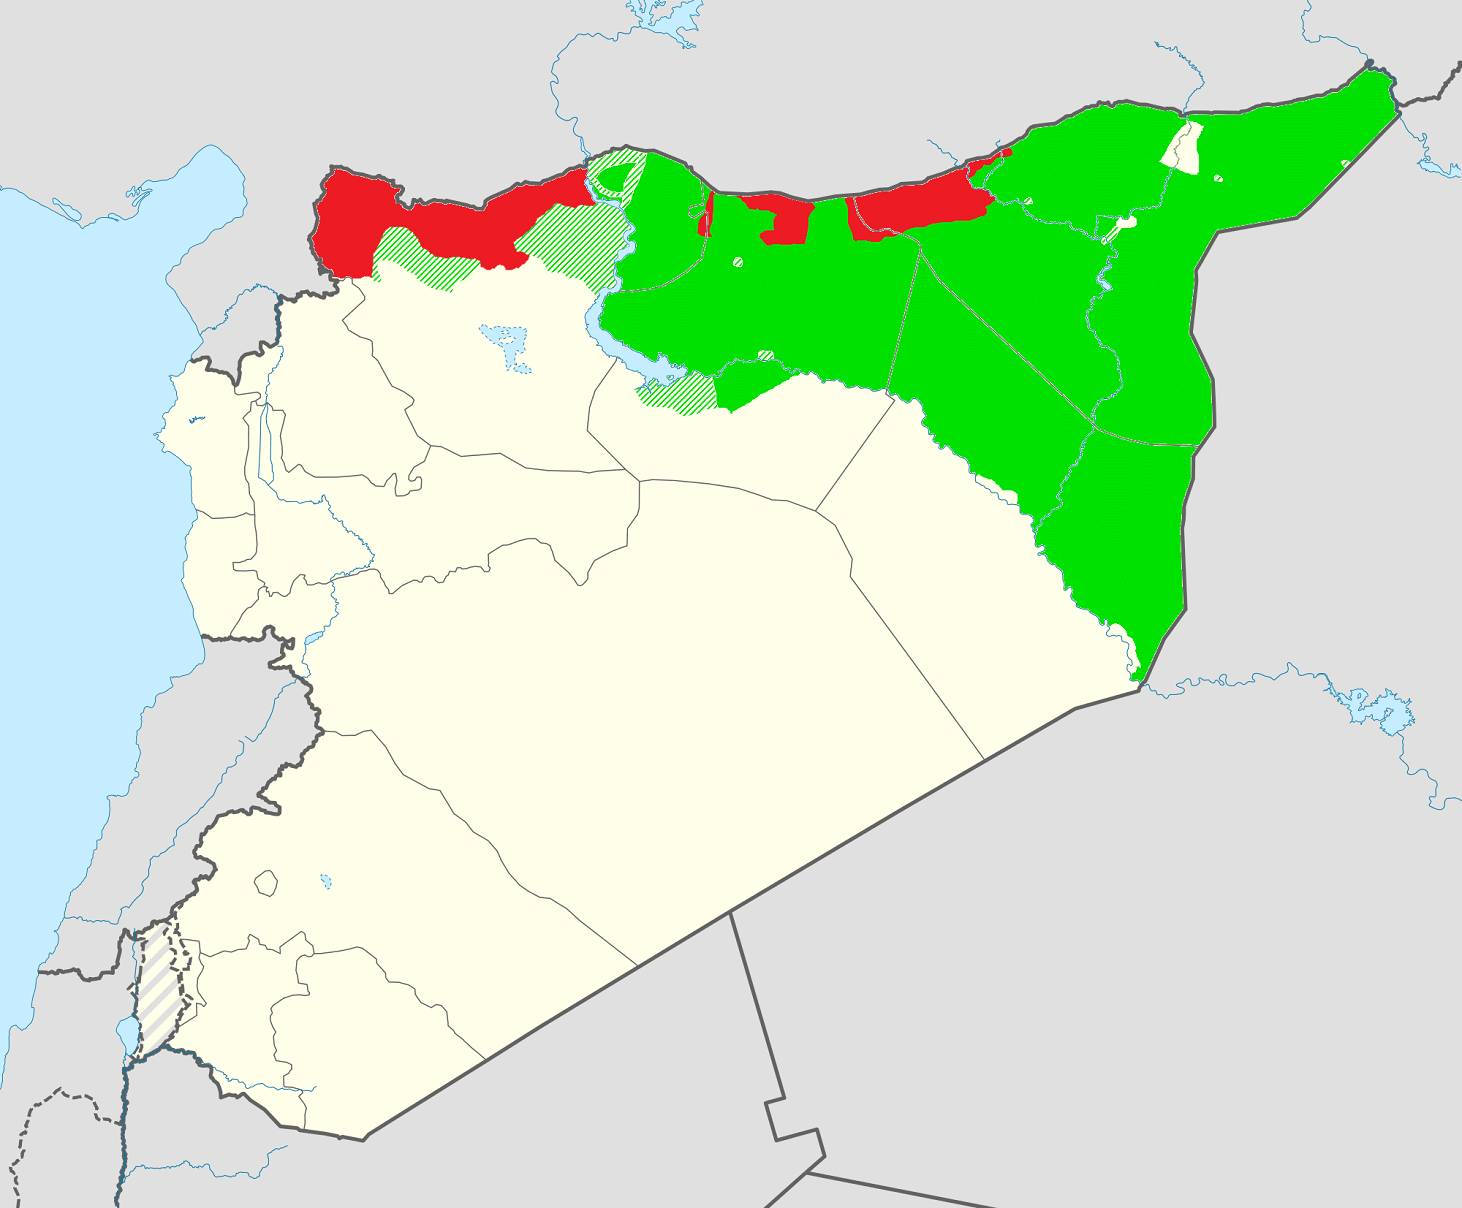 claimed_and_de_facto_territory_of_rojava